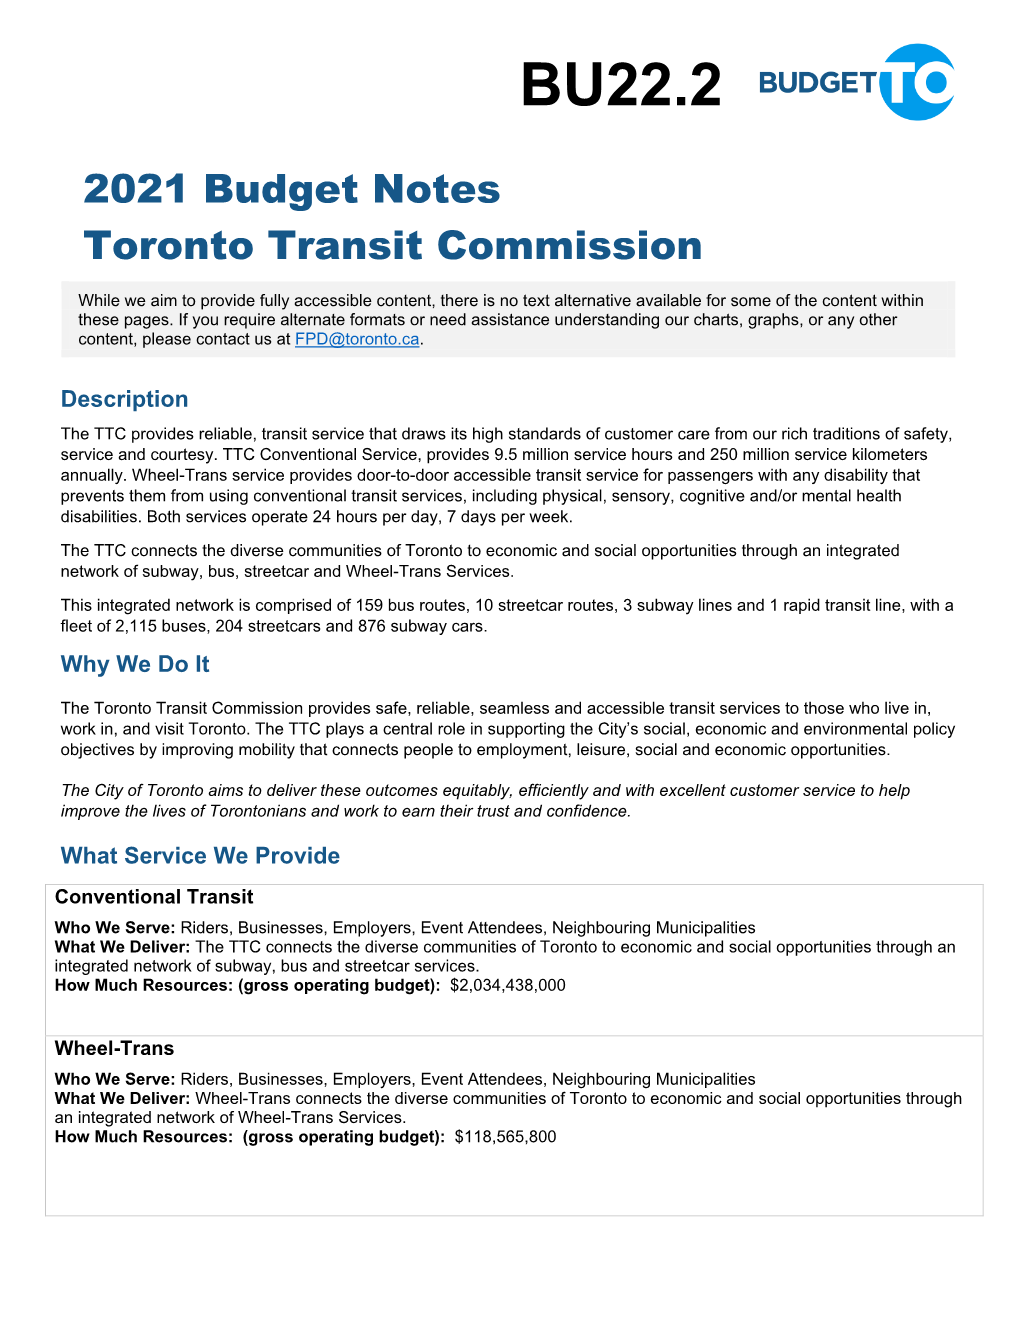 2021 Staff Recommended Capital and Operating Budget Notes – Toronto